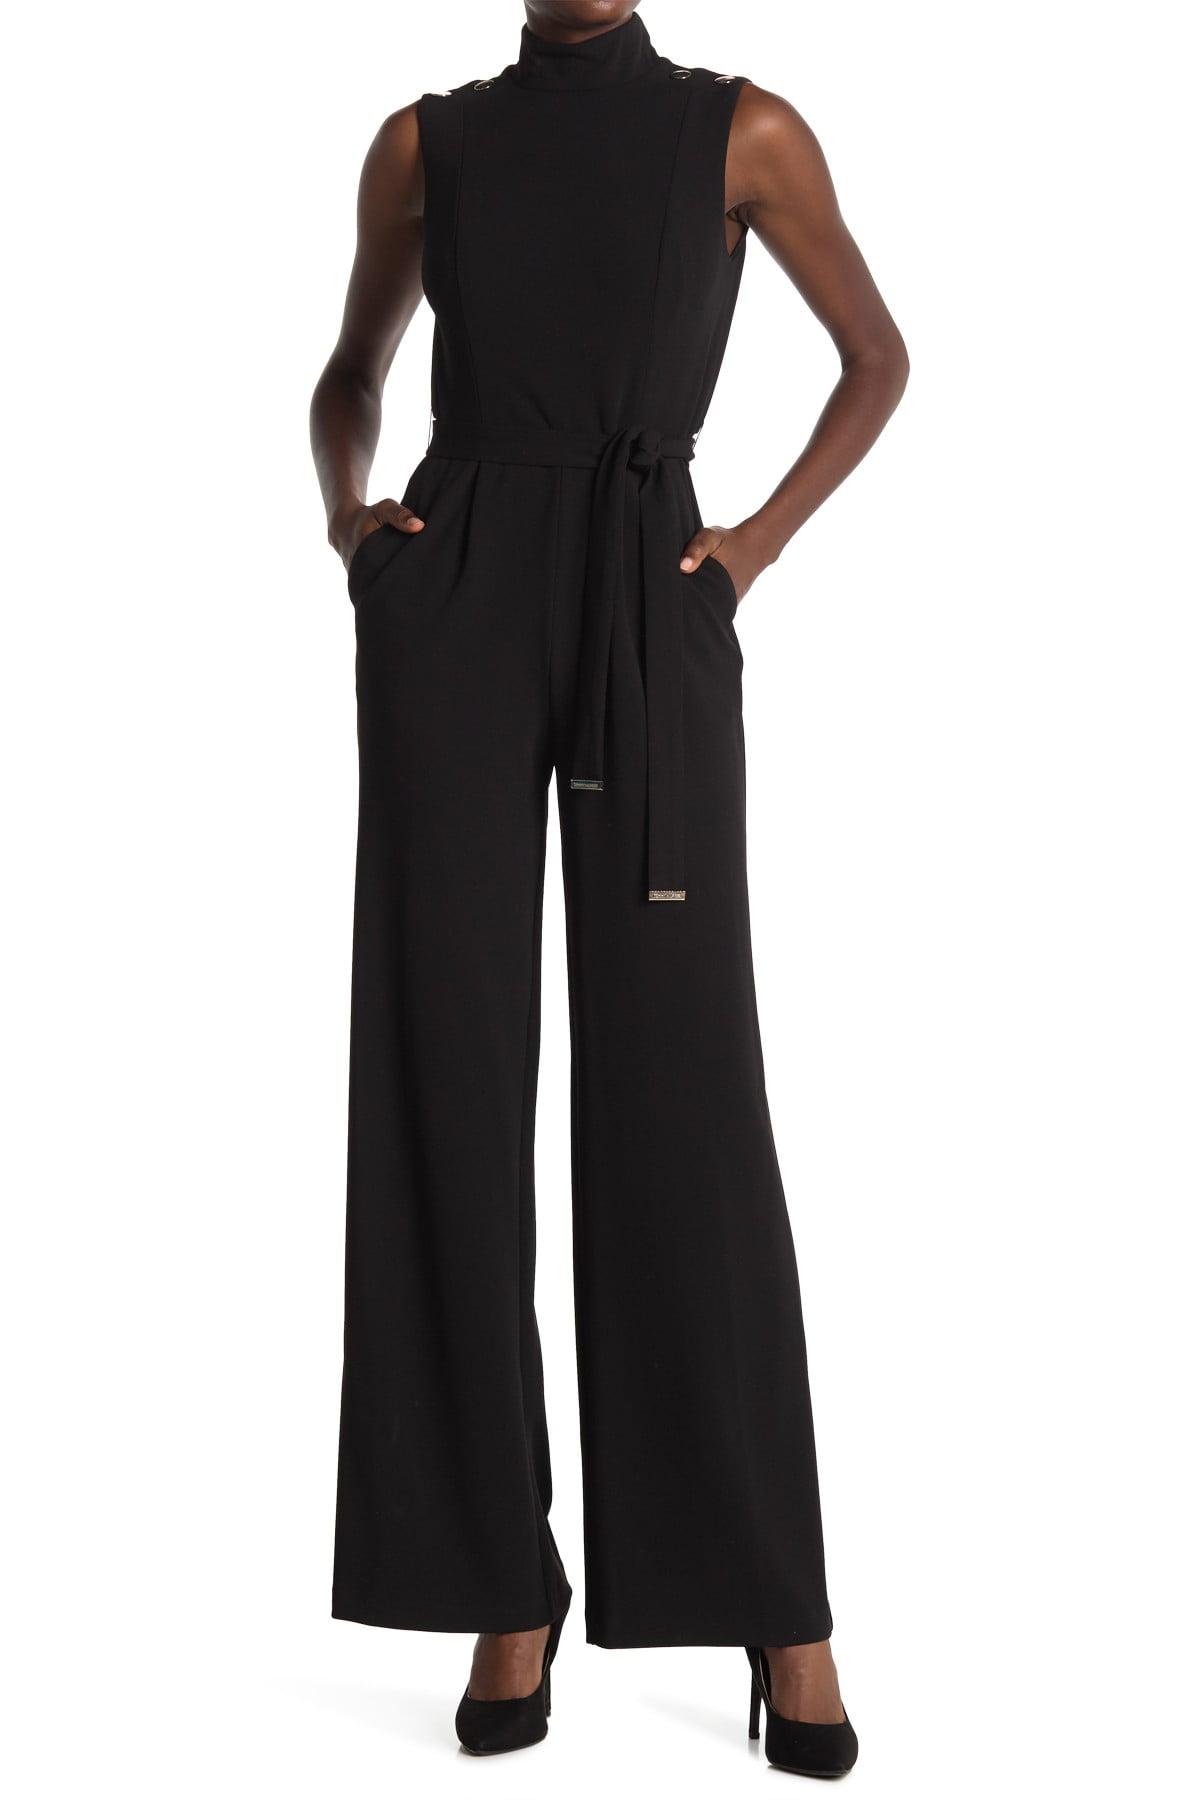 Tommy Hilfiger Synthetic Knit Jumpsuit in Black - Lyst